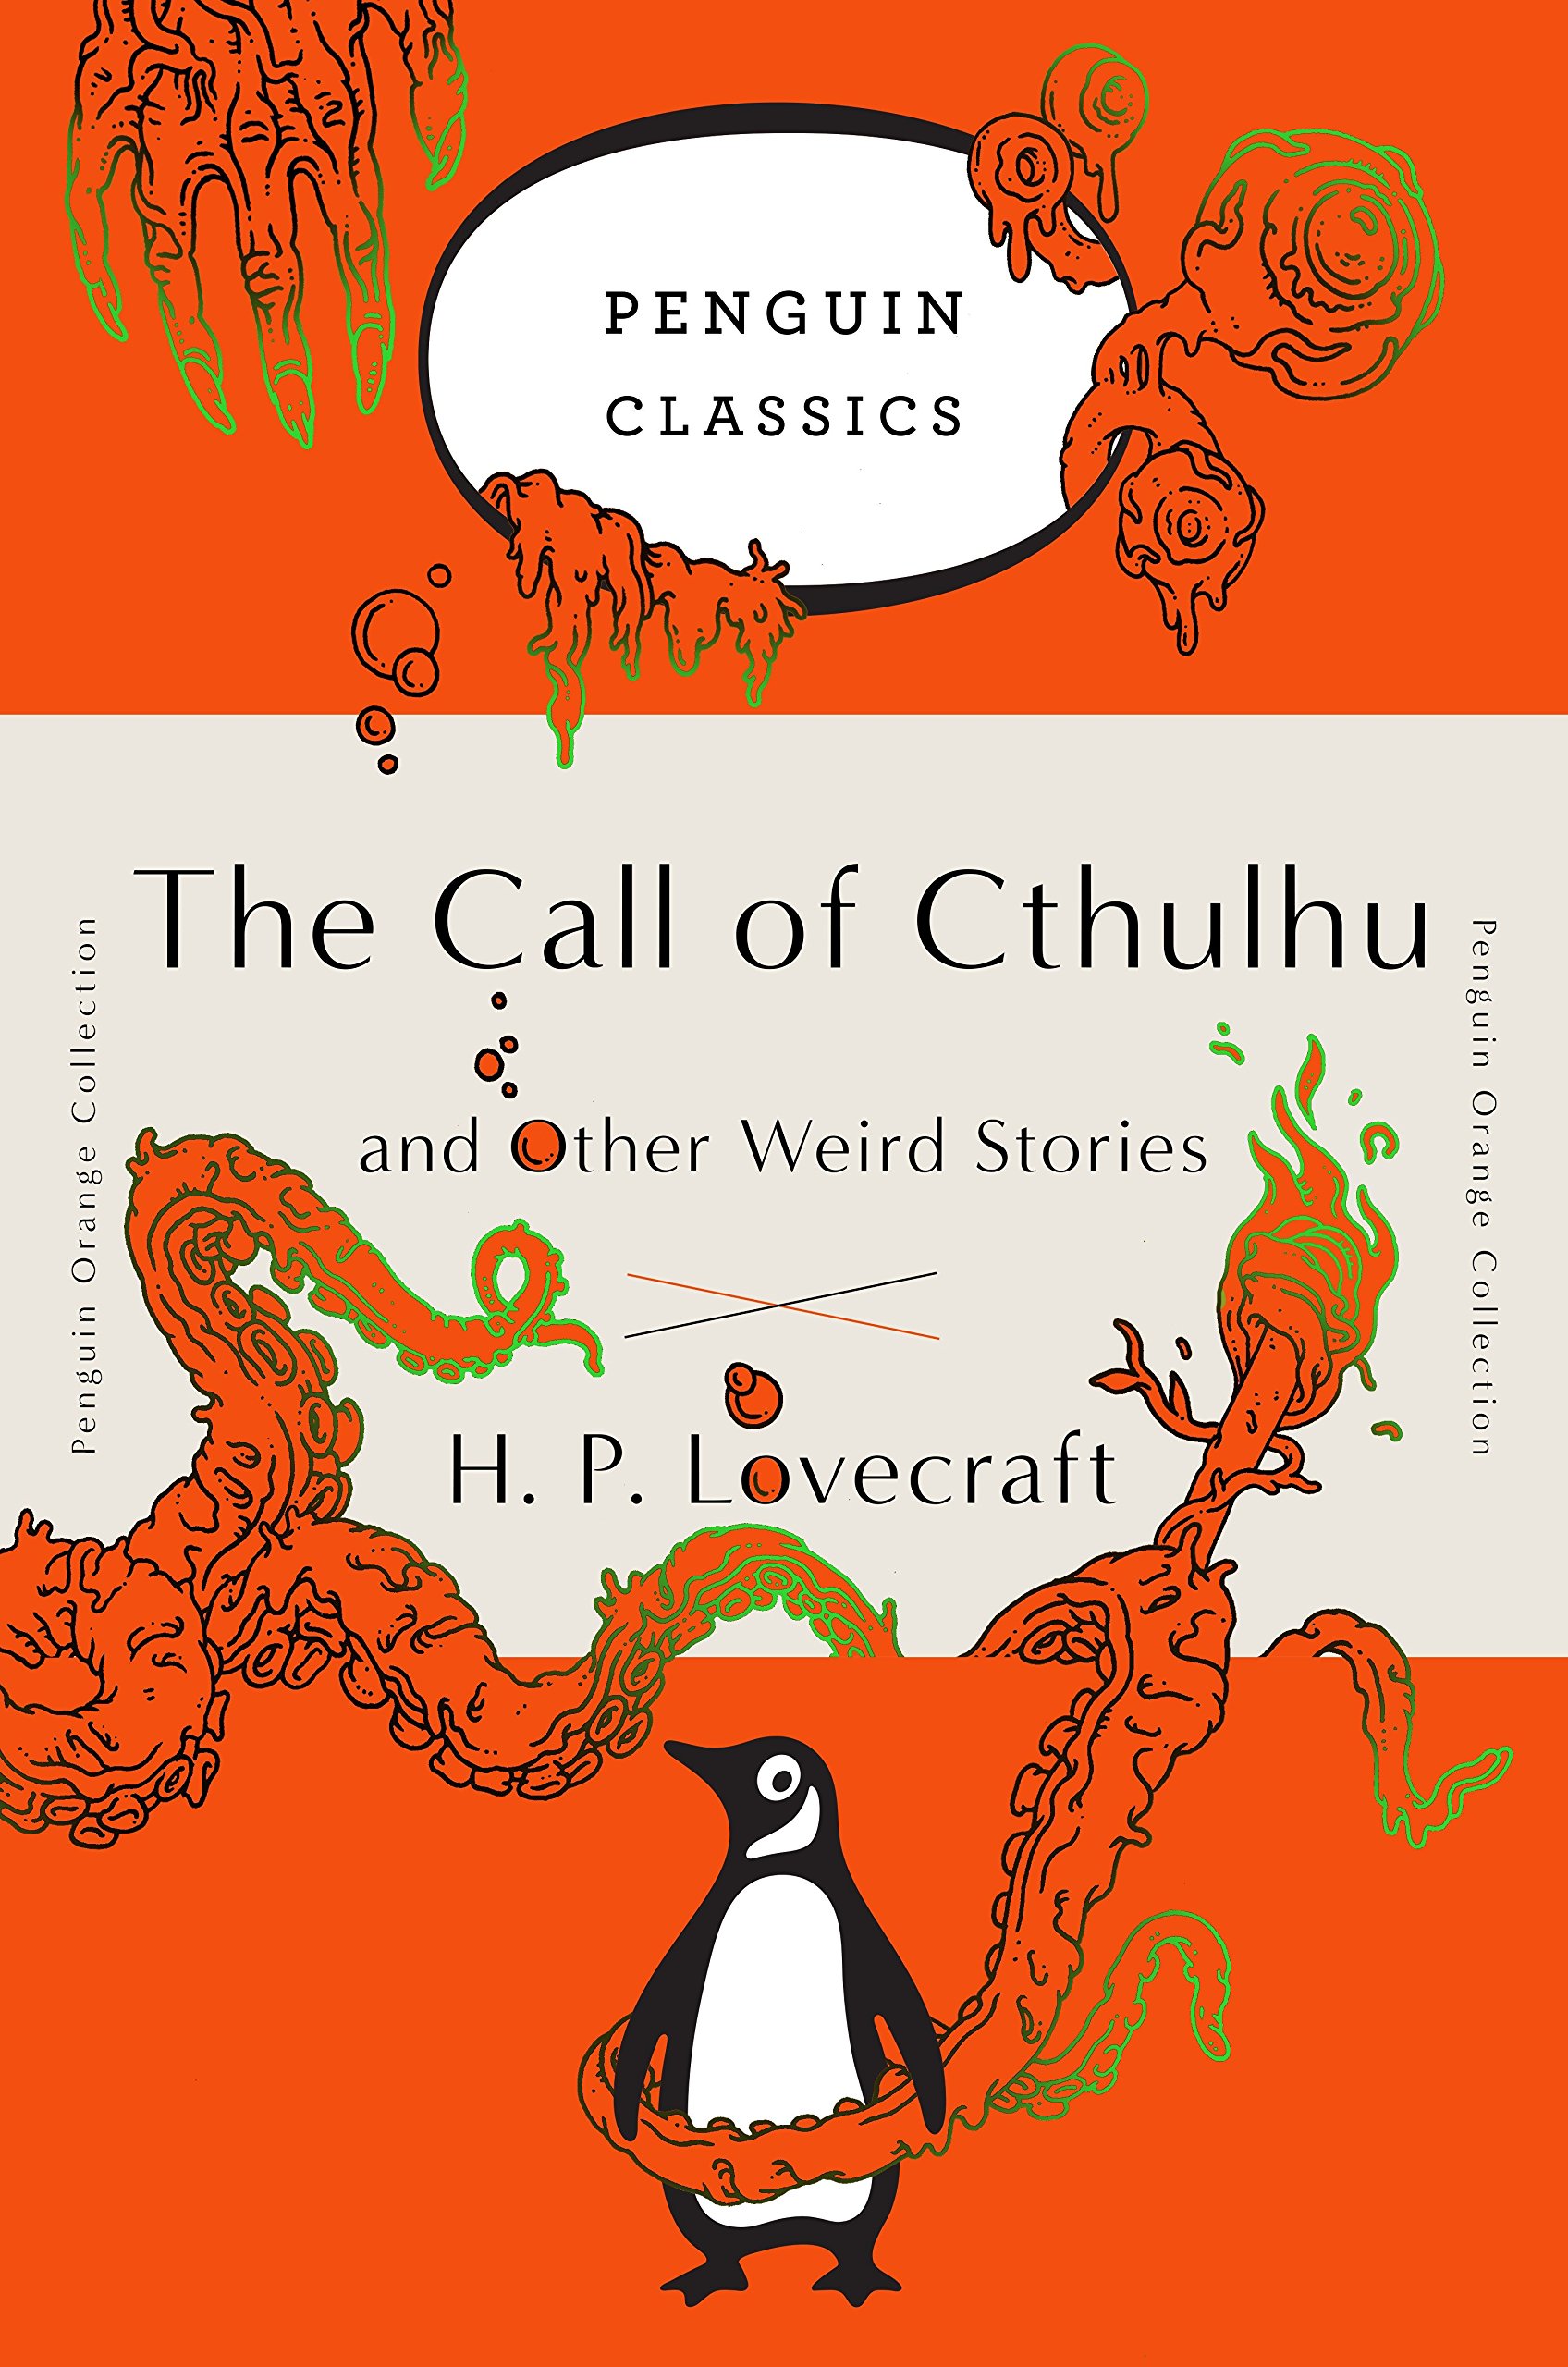 Paperback　and　P.　The　Call　Orange　Edge,　Stories:　of　Collection)　18,　Cthulhu　Deckle　Other　H.　2016　by　Weird　(Penguin　–　October　Lovecraft　Webdelico